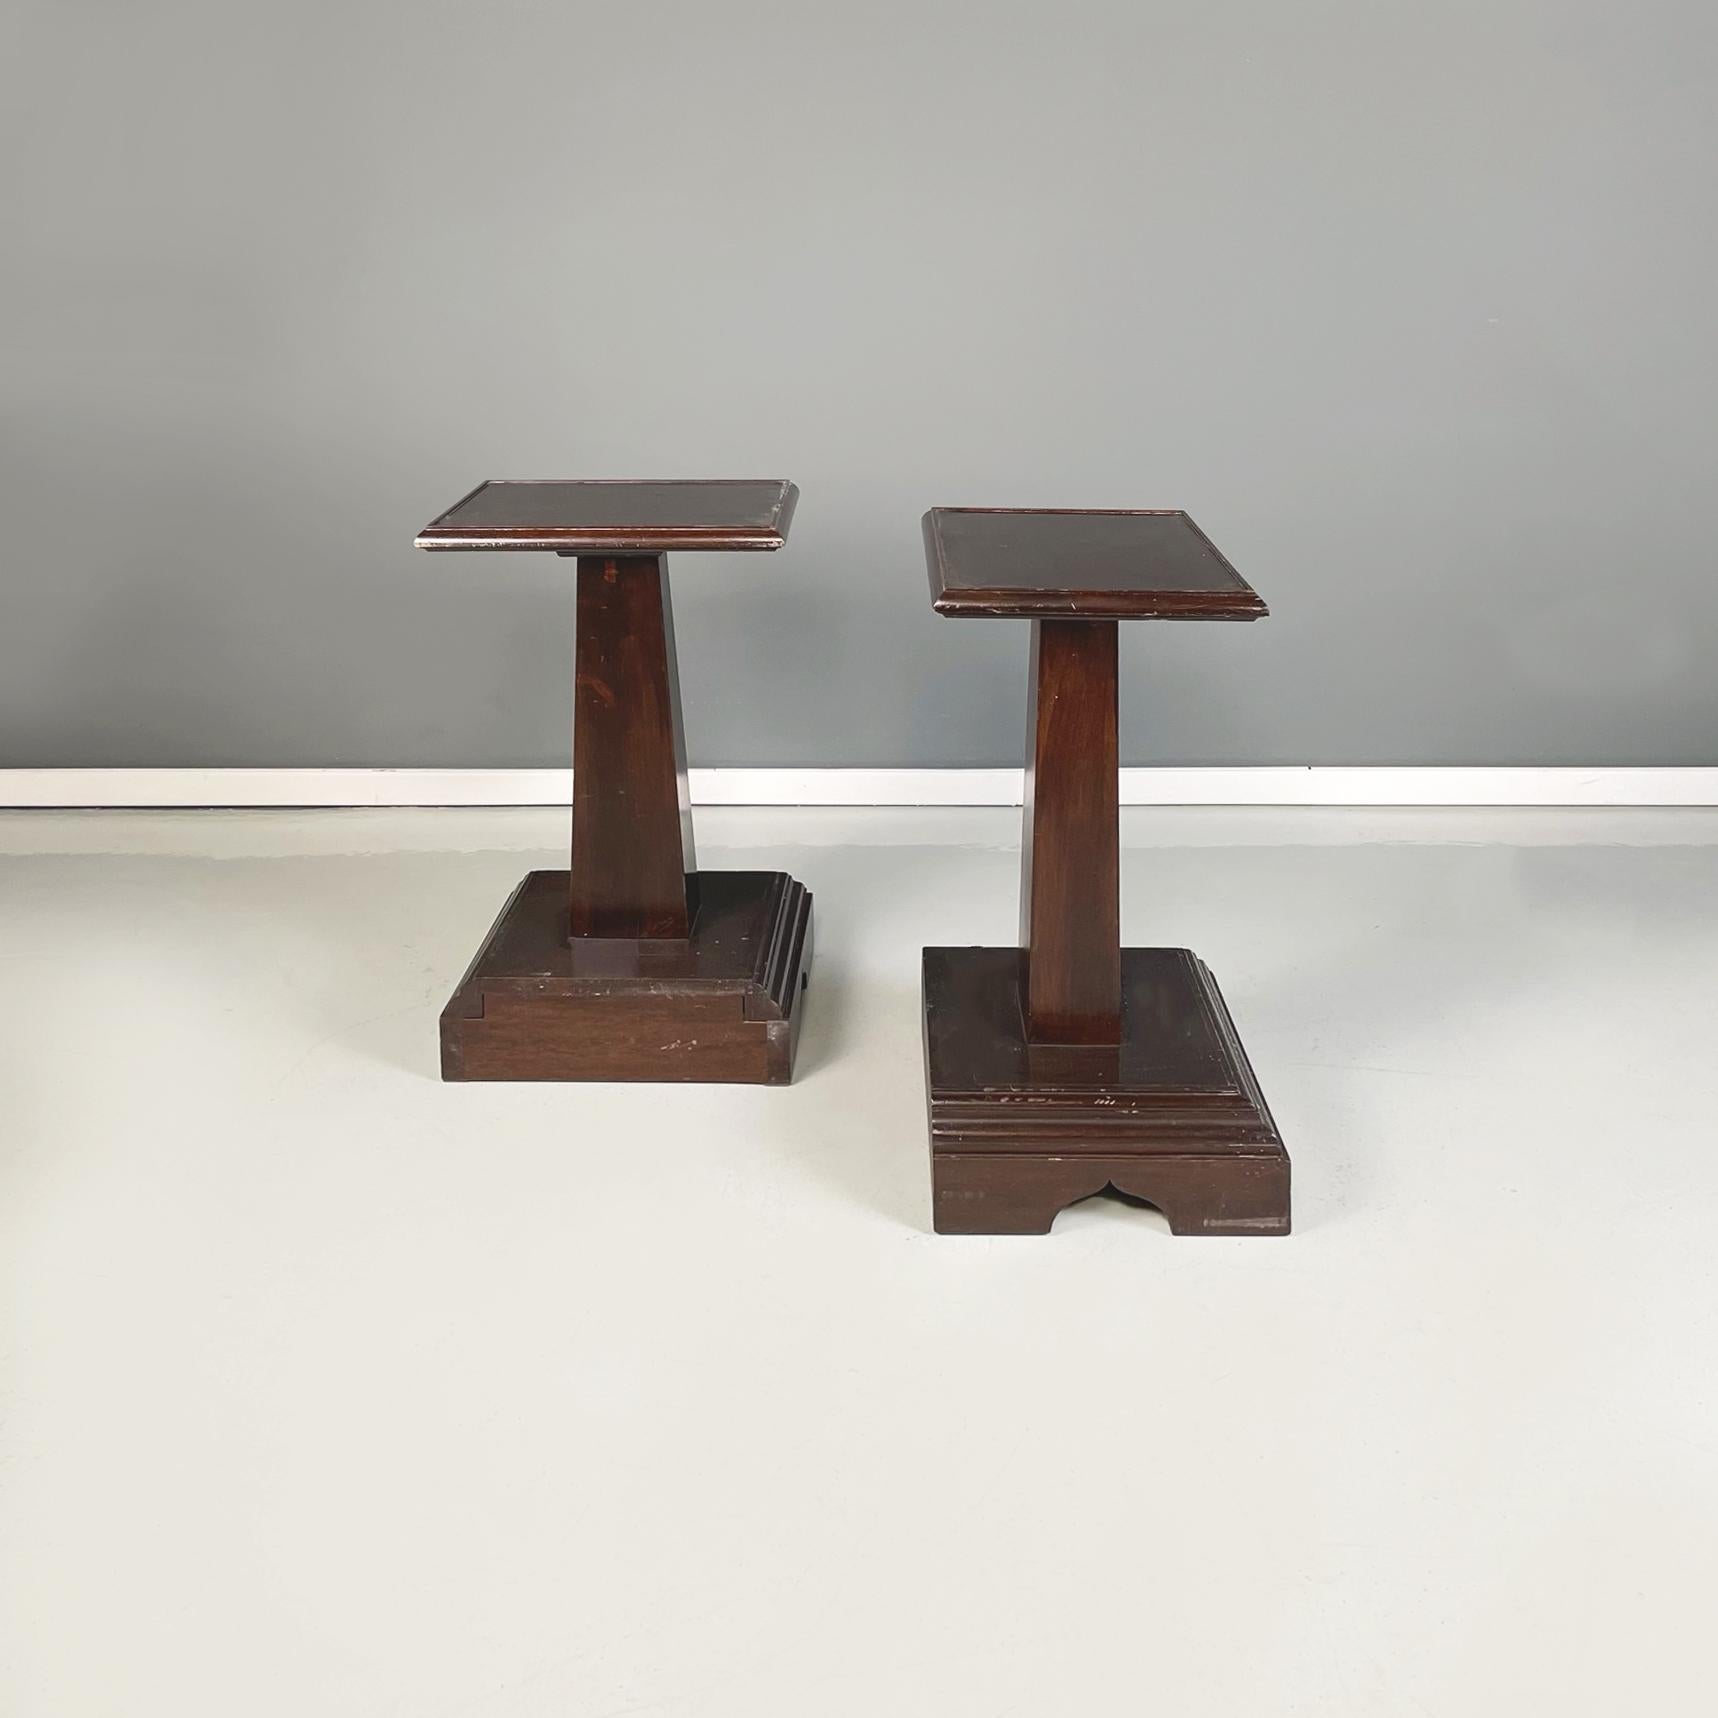 Italian Wooden side tables or pedestals, early 1900s
Pair of side tables or pedestals in dark wood. The rectangular top is supported by a central column with a square section. The rectangular base is finely crafted. Suitable as exhibitors of small